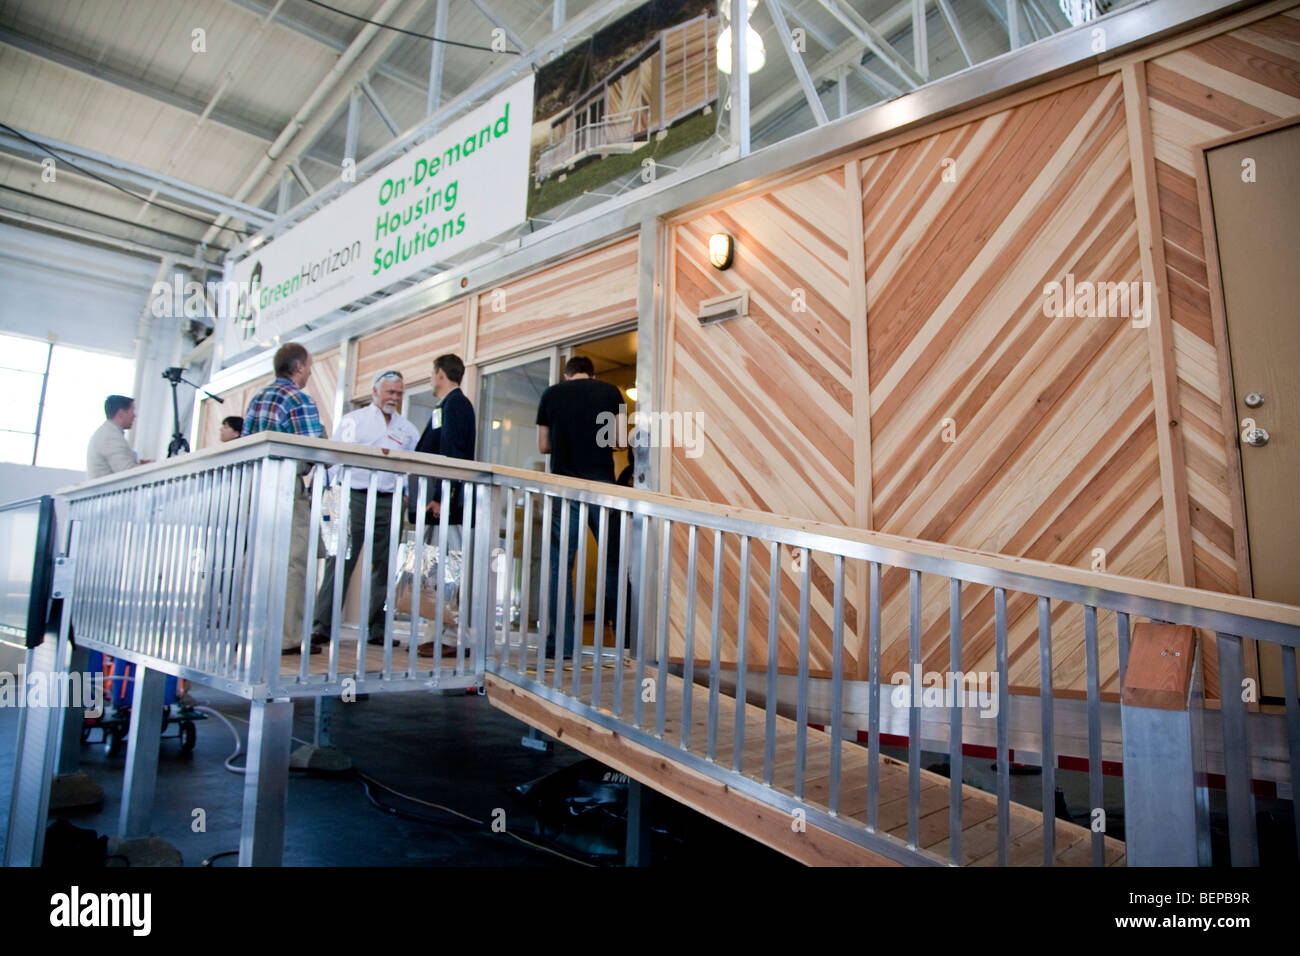 Green Horizon Manufacturing portable, on-demand emergency housing on display at exposition. United States Stock Photo